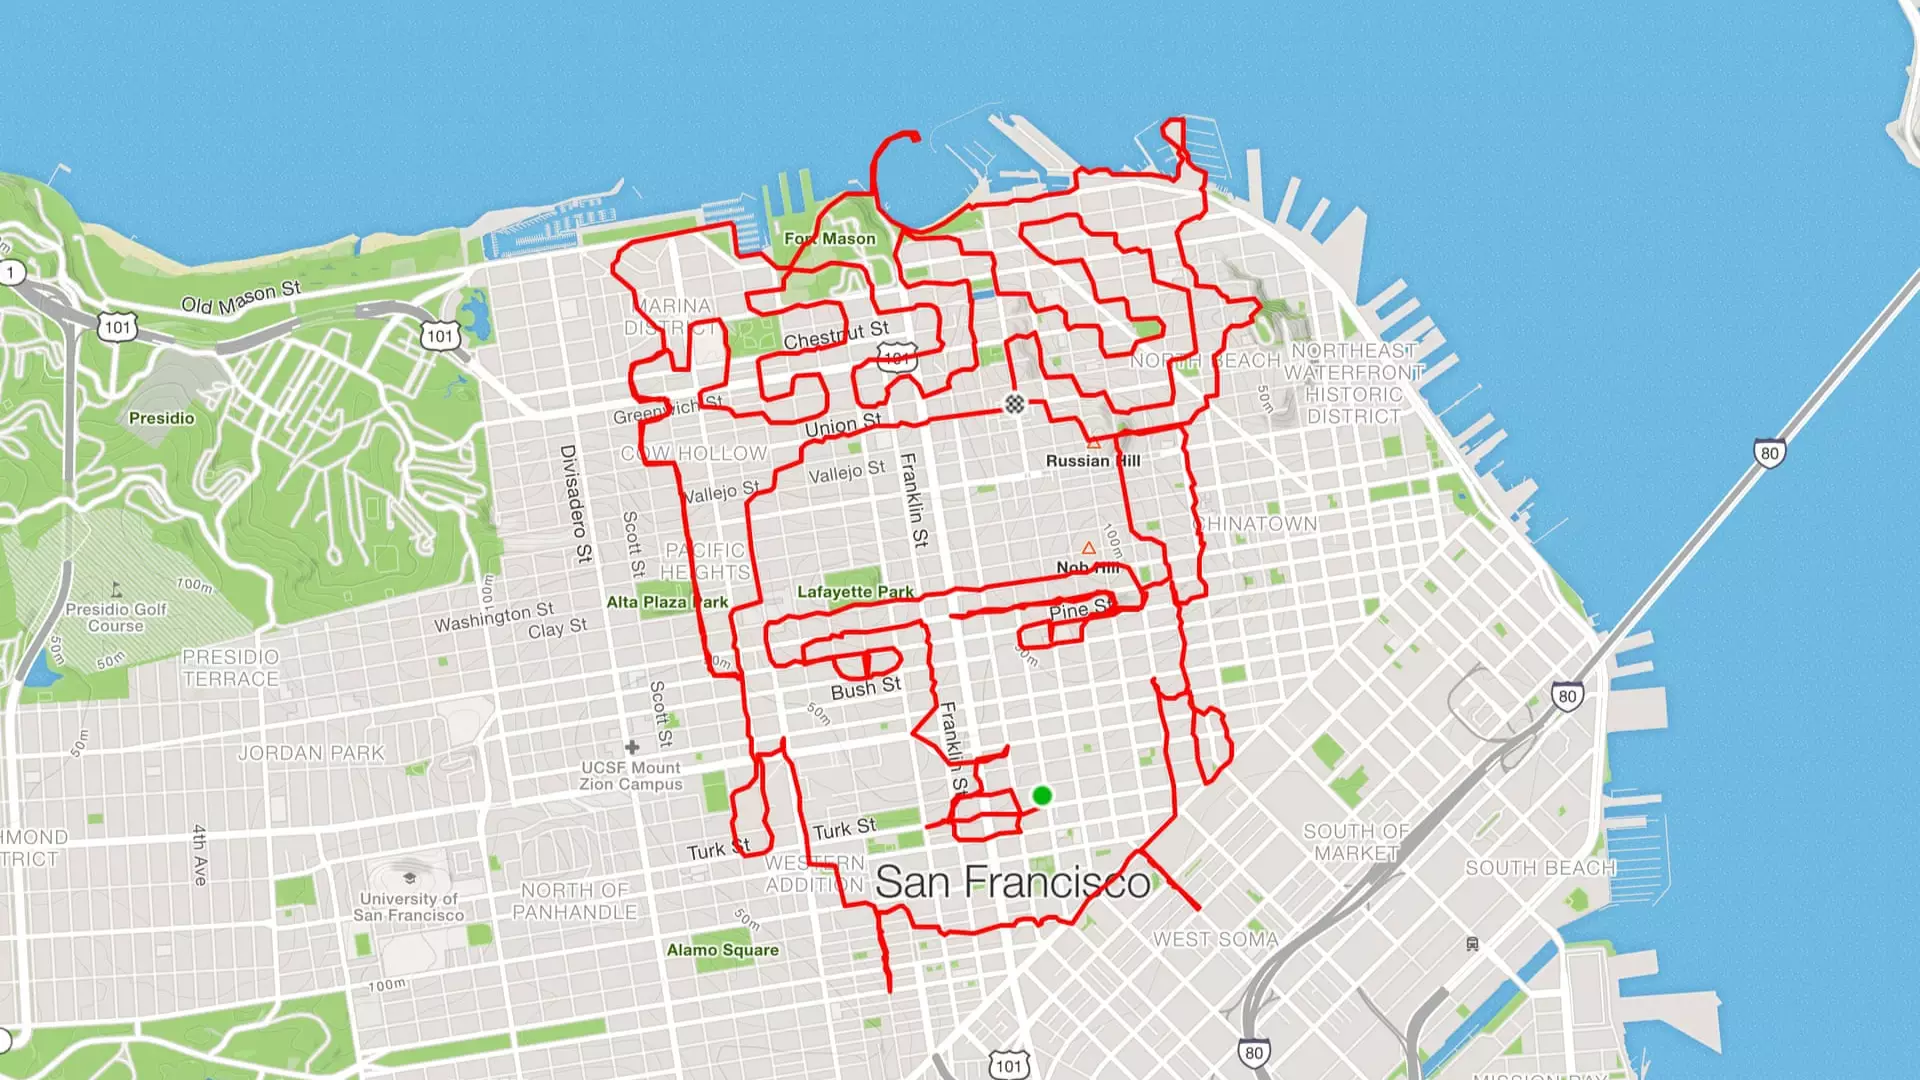 Runner Uses App To Make Elaborate Artwork On His Routes